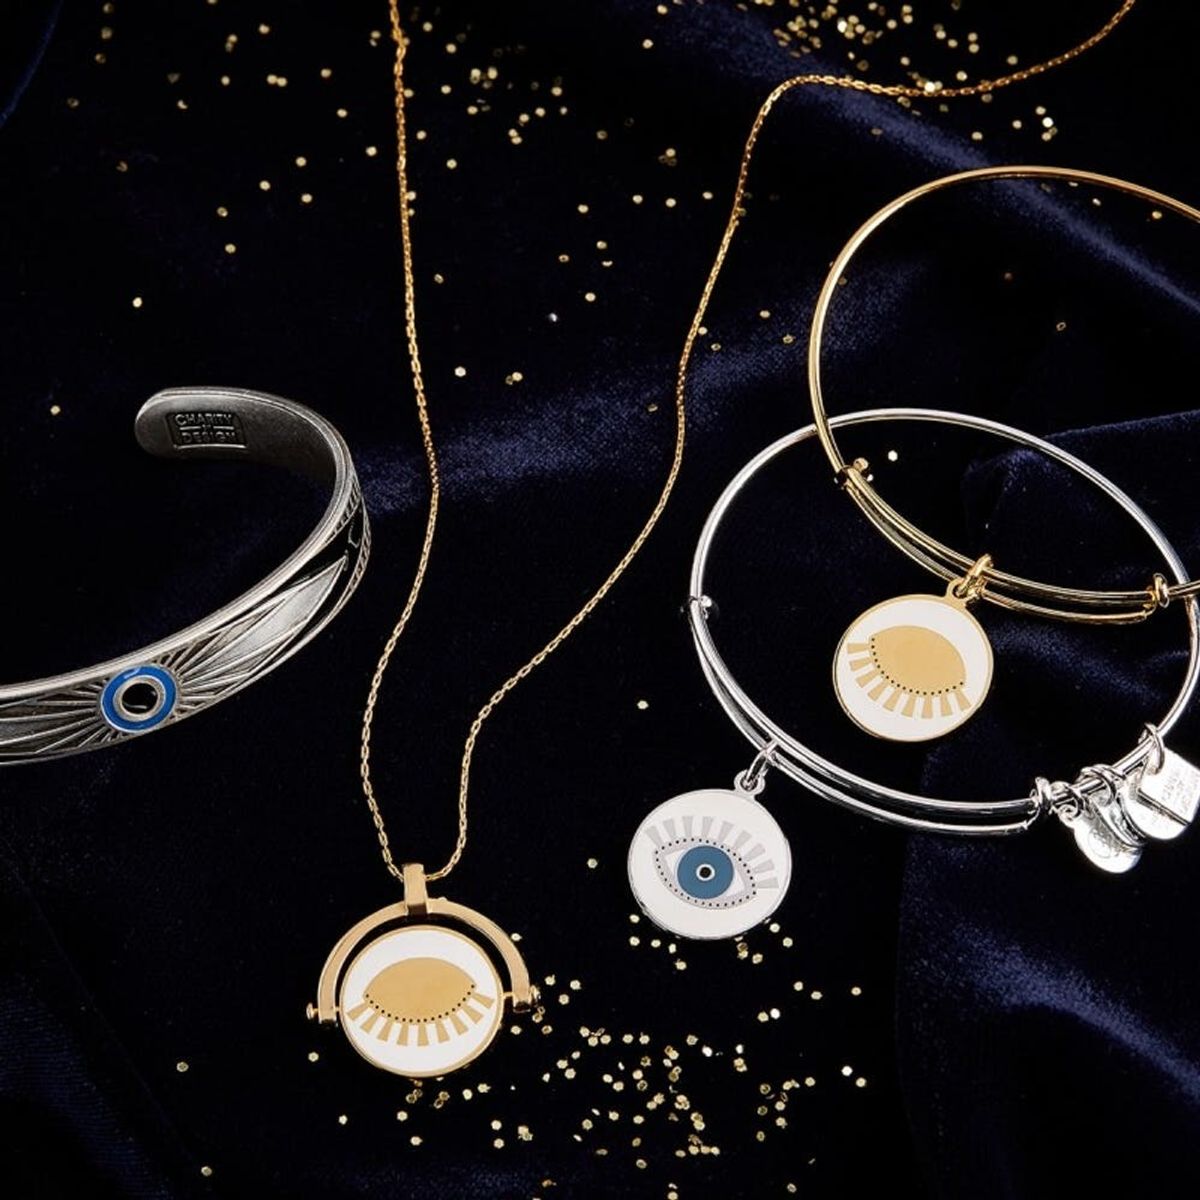 Twin Peaks Creator David Lynch Designed a Celestial New Jewelry Collection